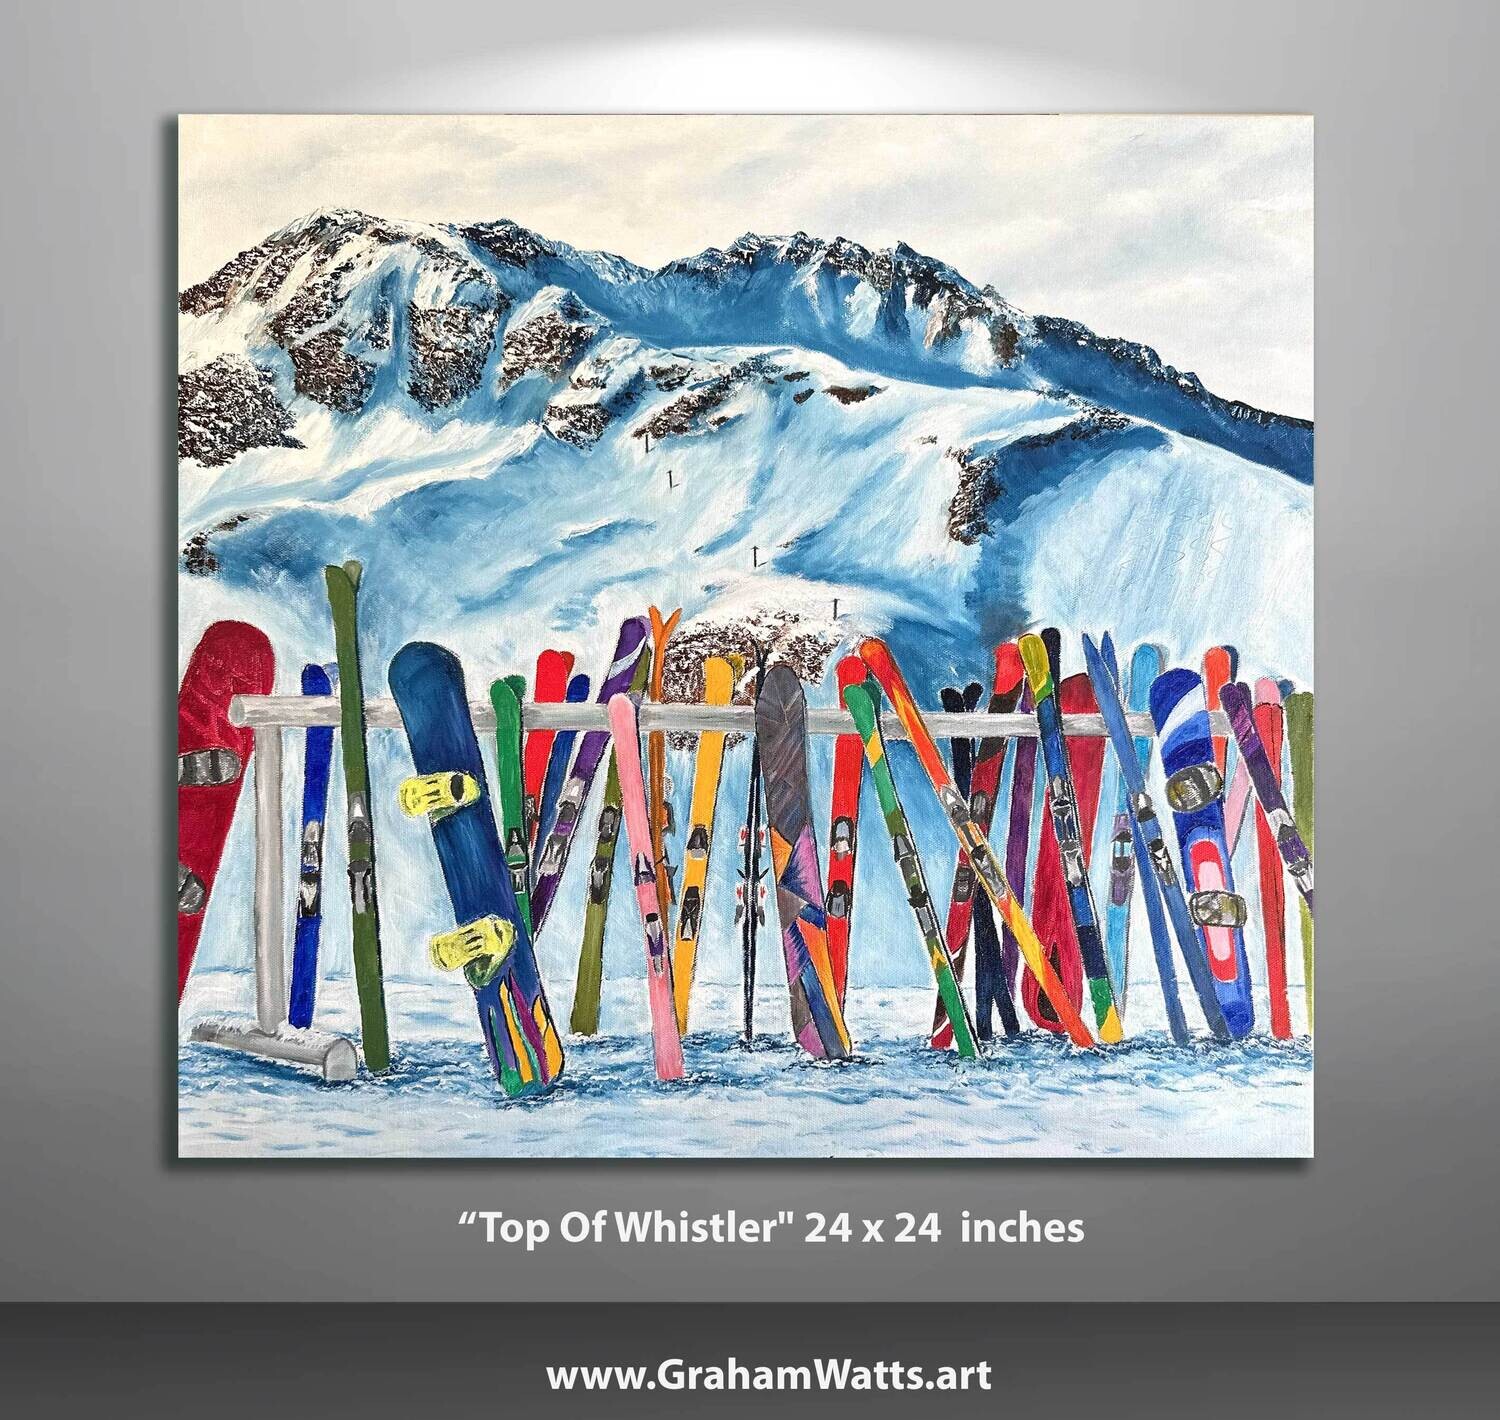 "Top of the World, Whistler BC" 24 x 24 inches, Stacey M. Commission